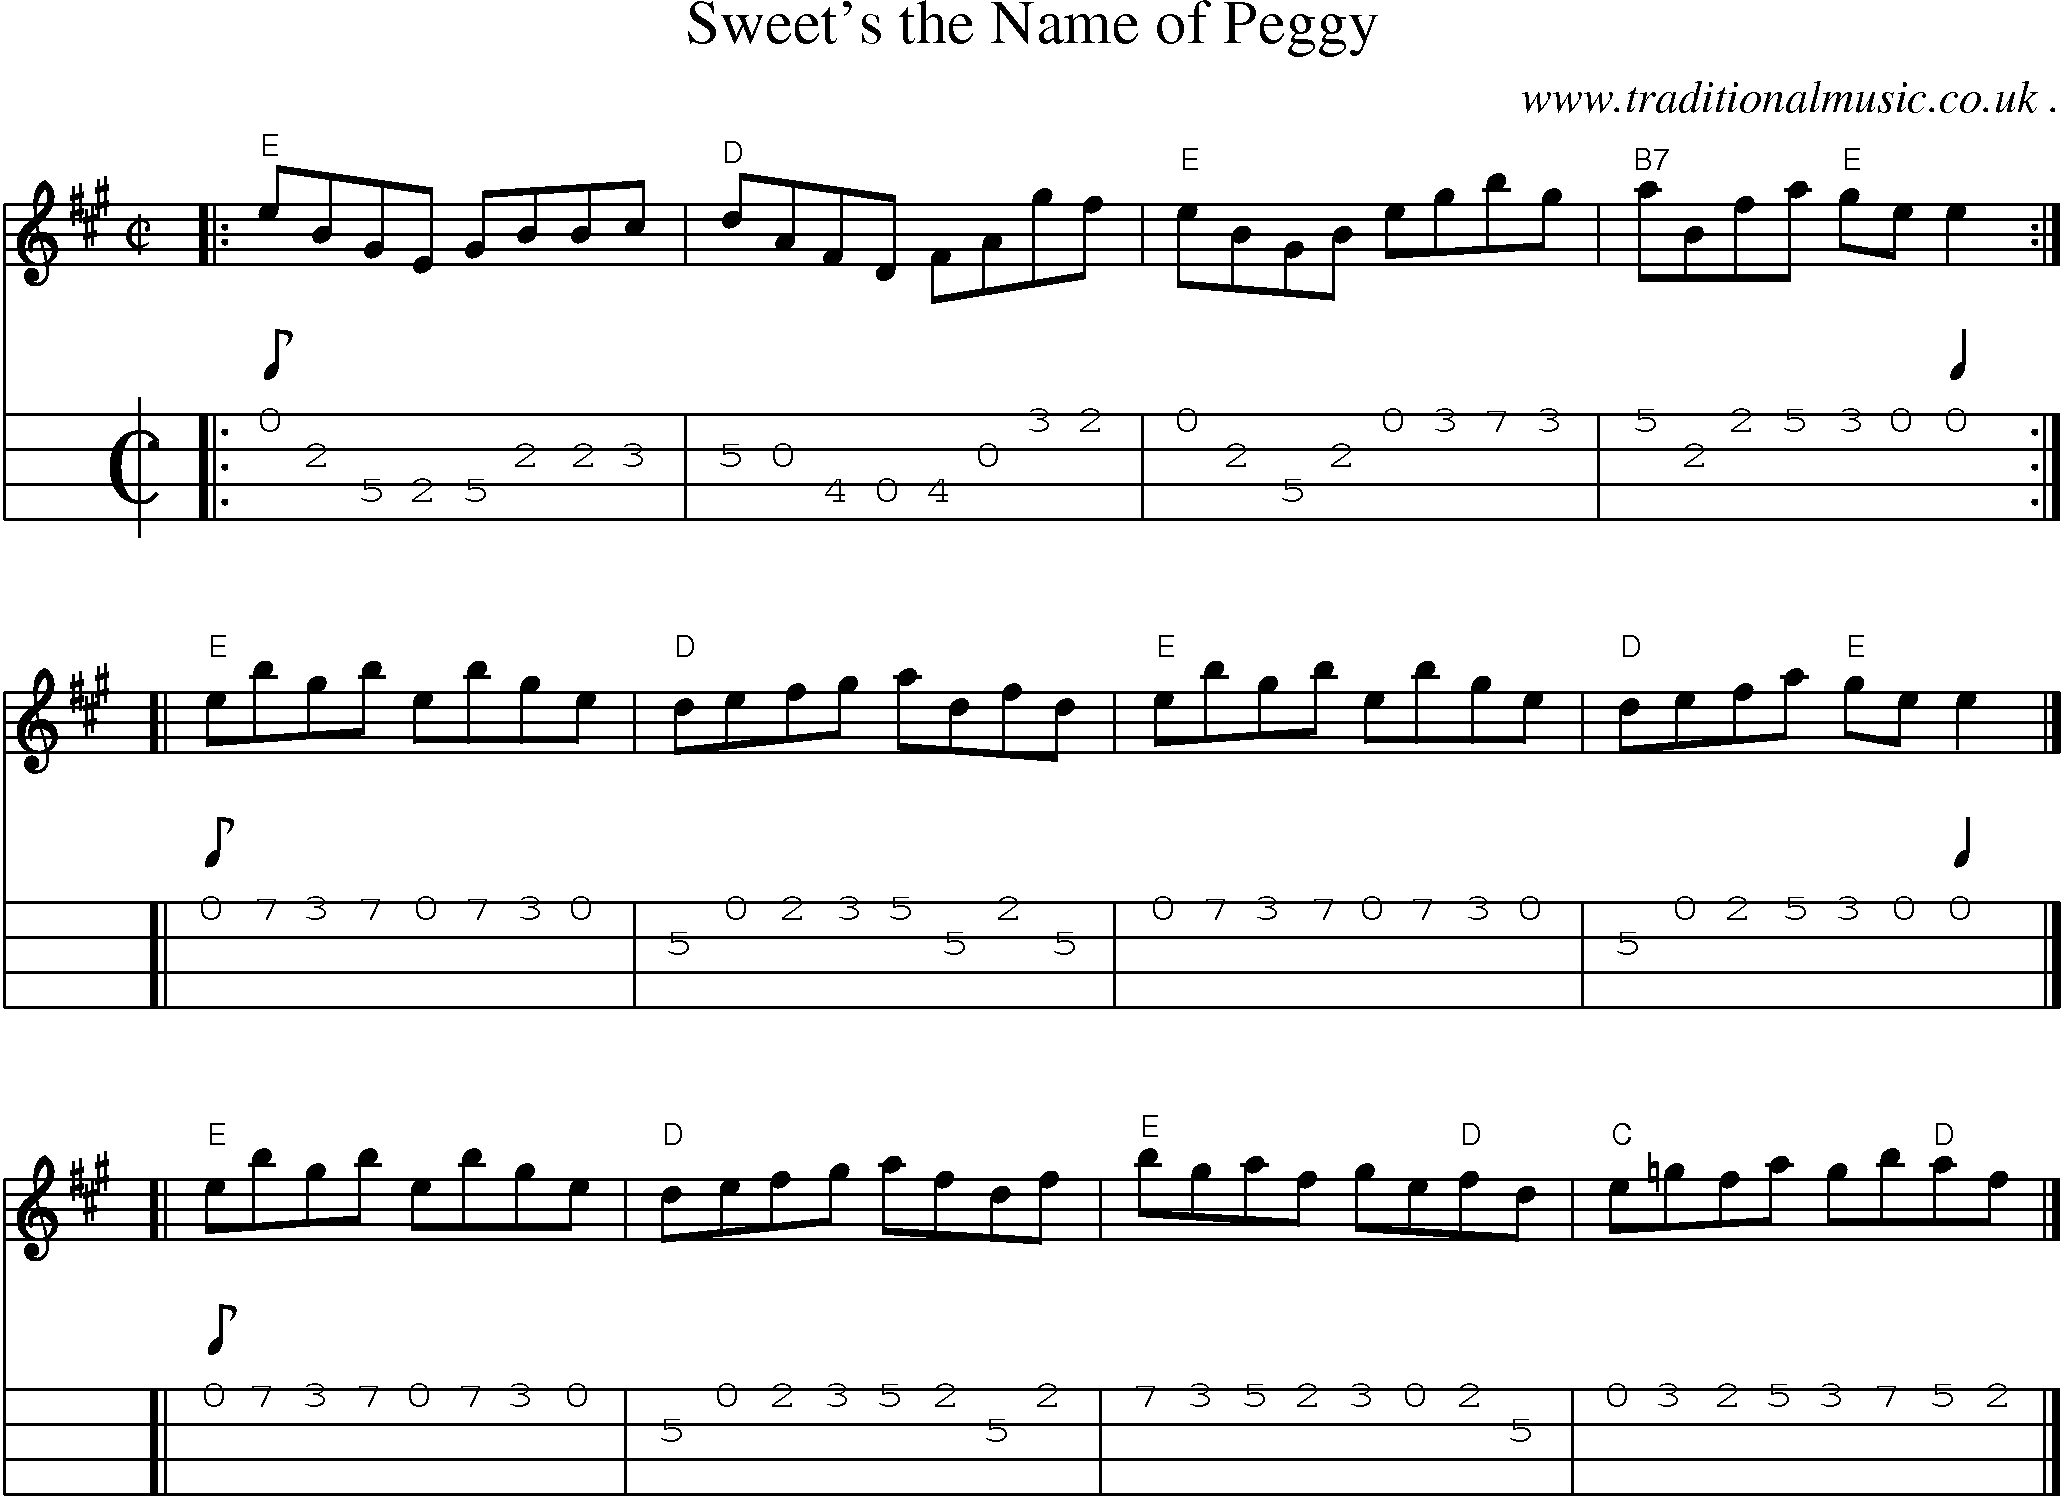 Sheet-music  score, Chords and Mandolin Tabs for Sweets The Name Of Peggy